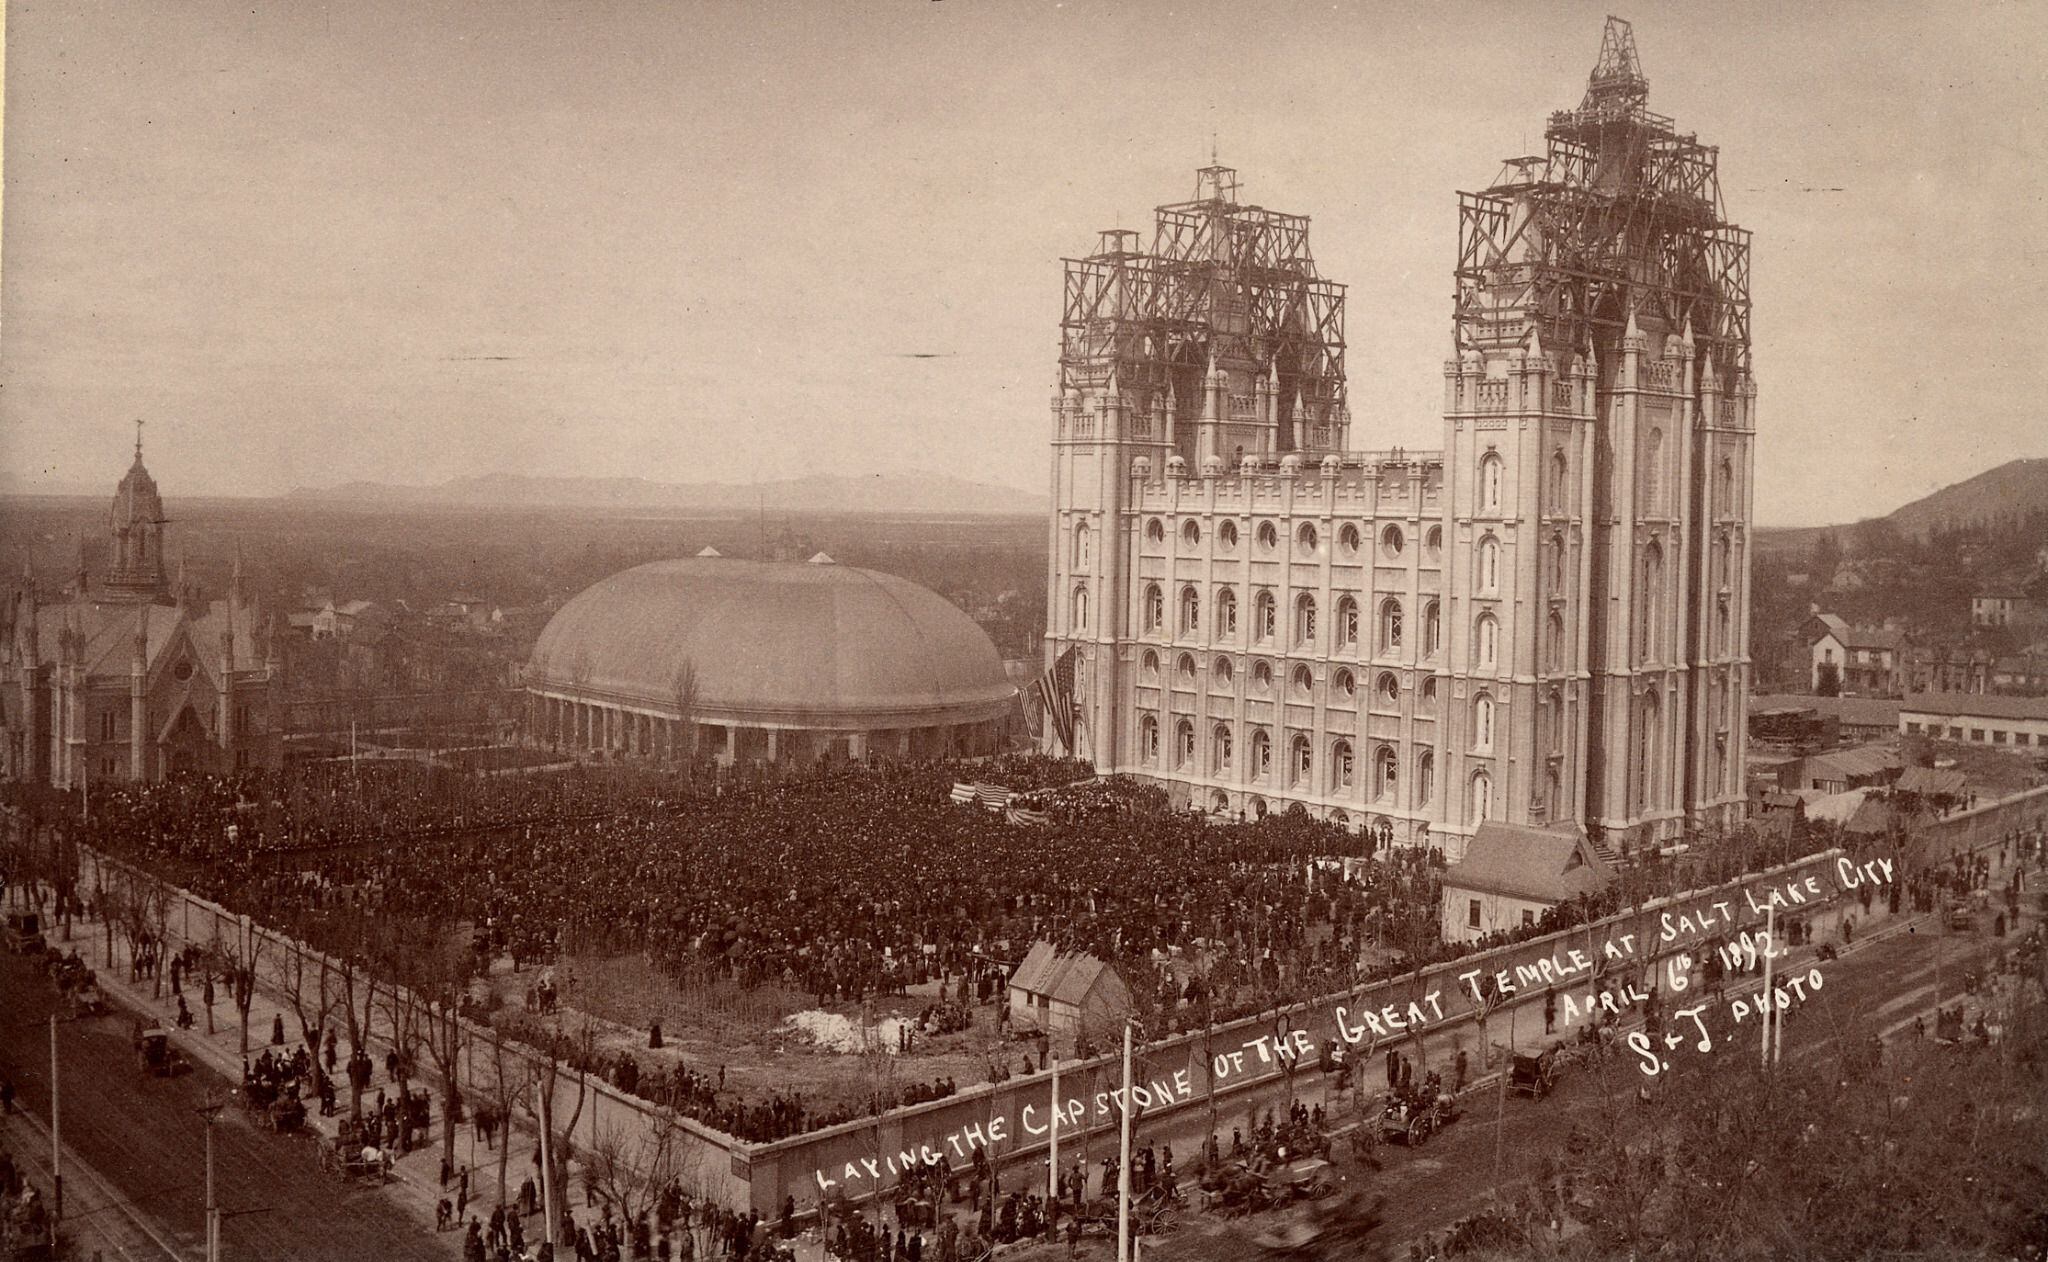 (photo courtesy The Church of Jesus Christ of Latter-day Saints) A crowd of 30,000 people gathered to witness the laying of the capstone of the Salt Lake Temple on April 6, 1892.